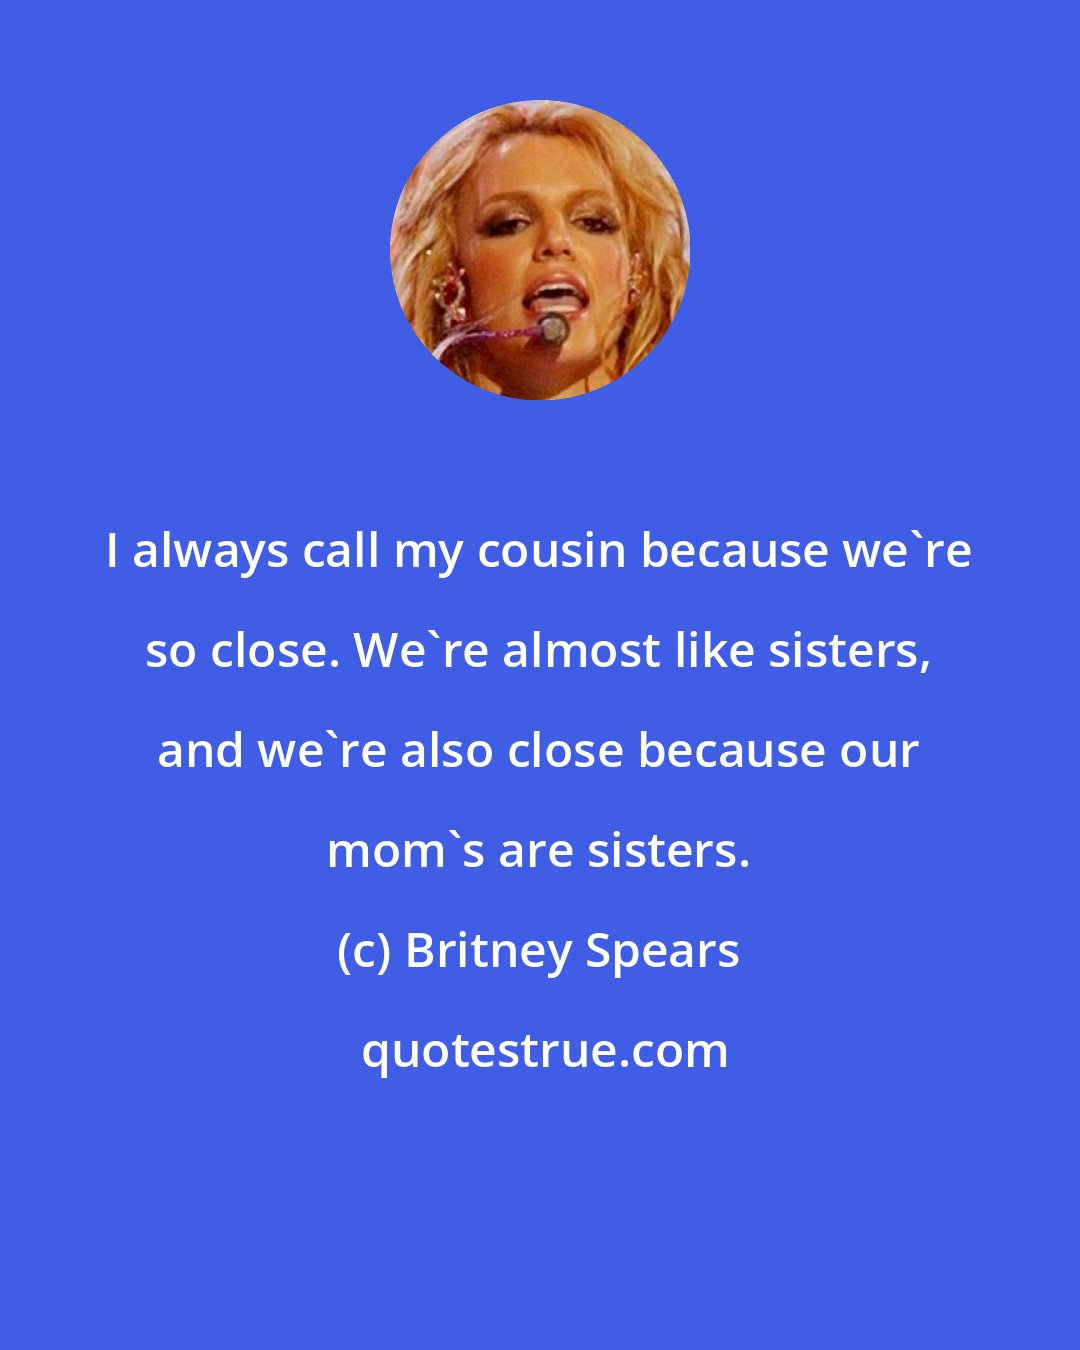 Britney Spears: I always call my cousin because we're so close. We're almost like sisters, and we're also close because our mom's are sisters.